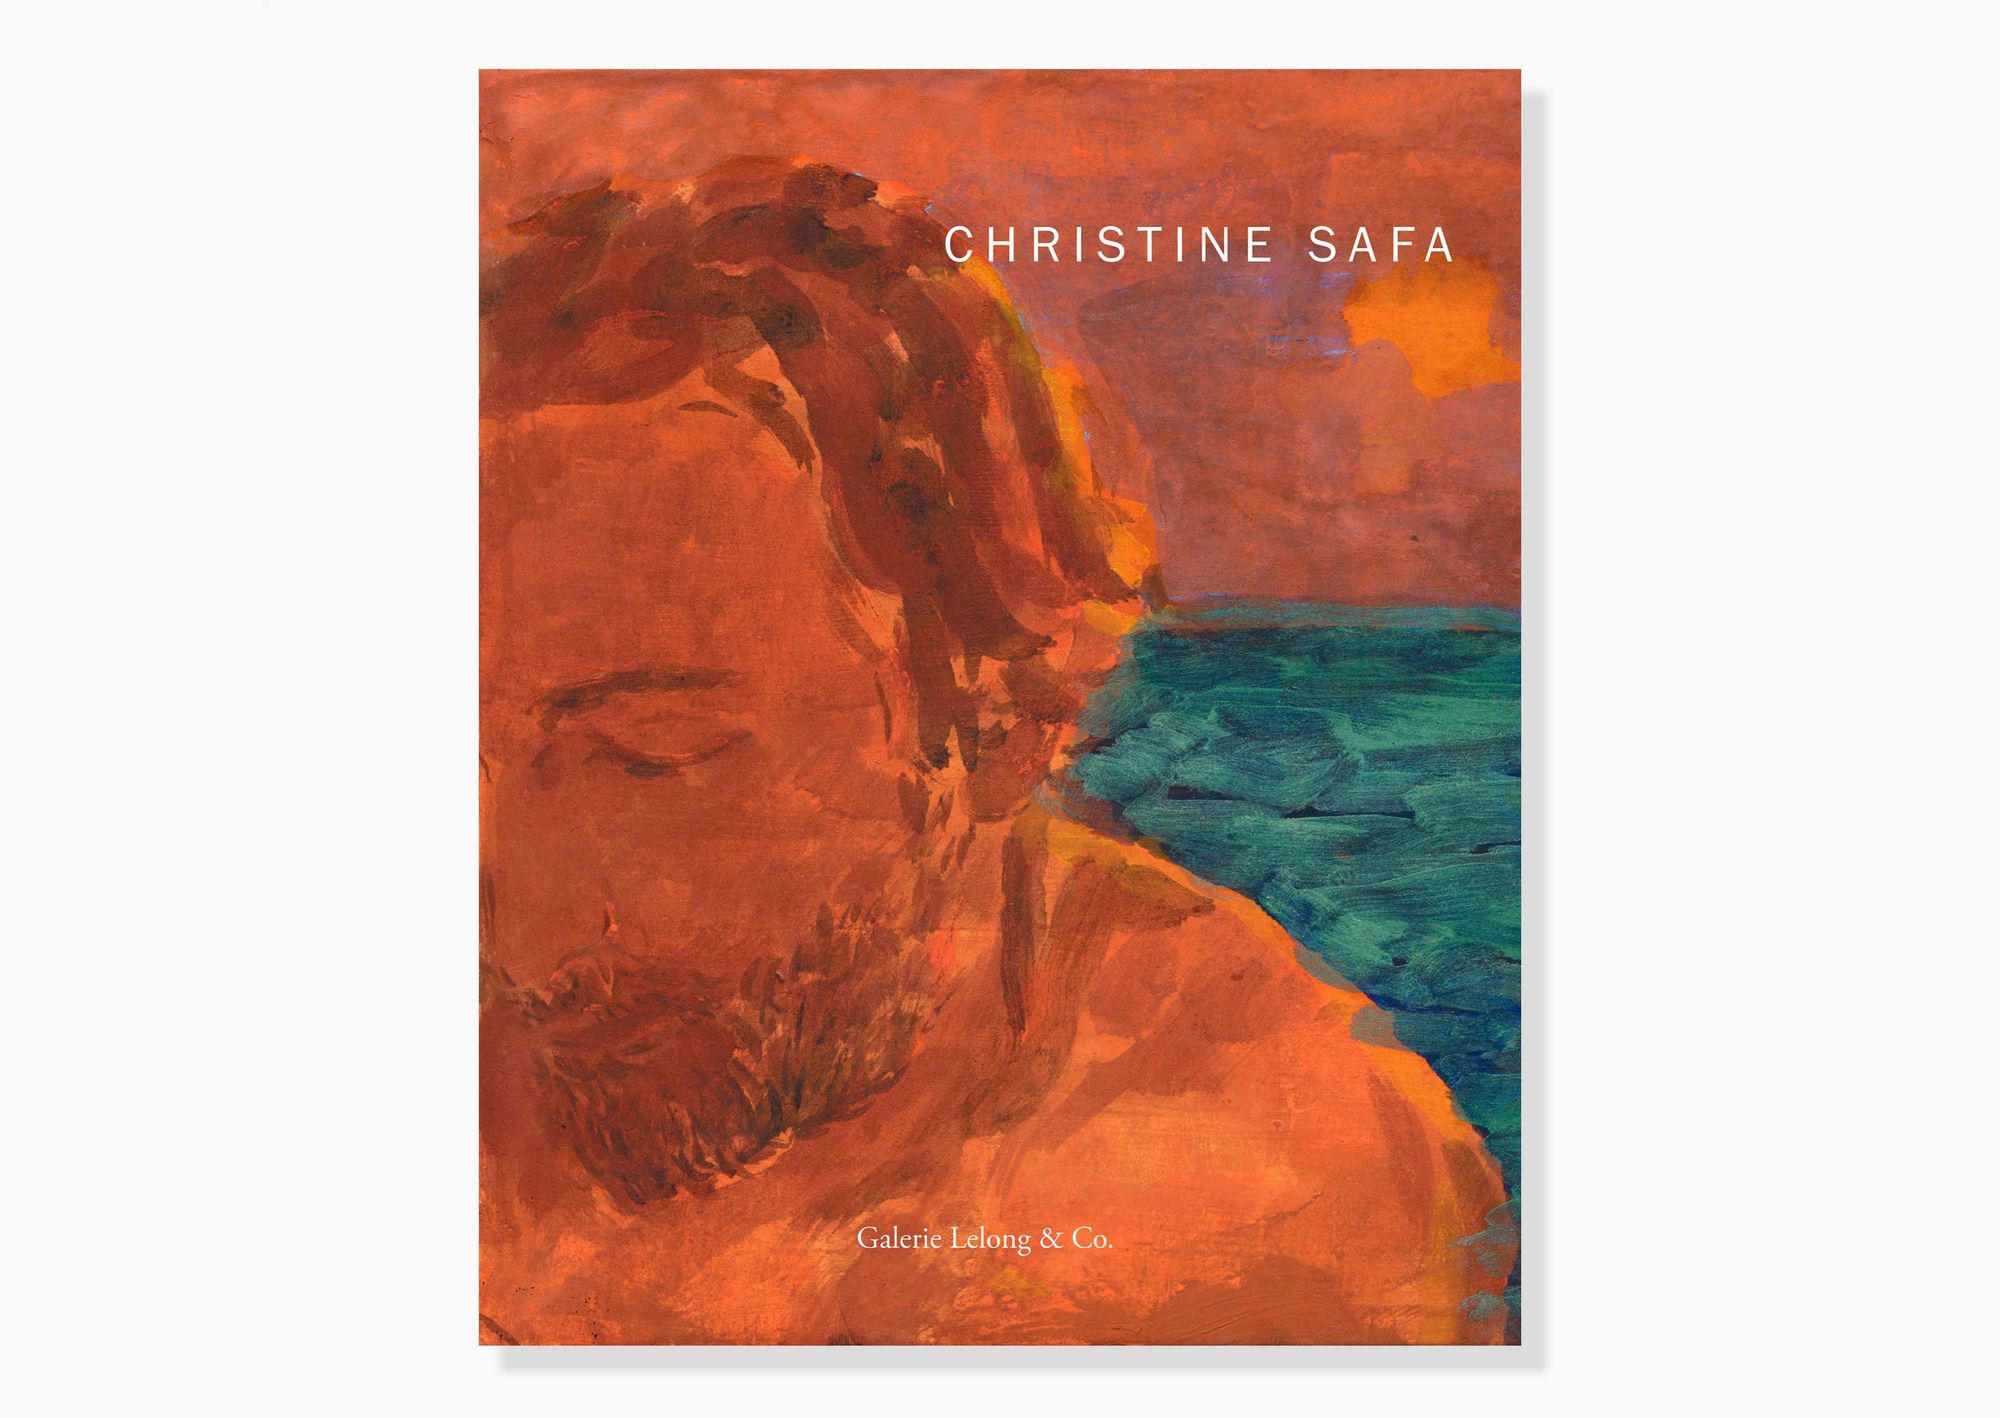 Book cover on plain background with title of Christine Safa